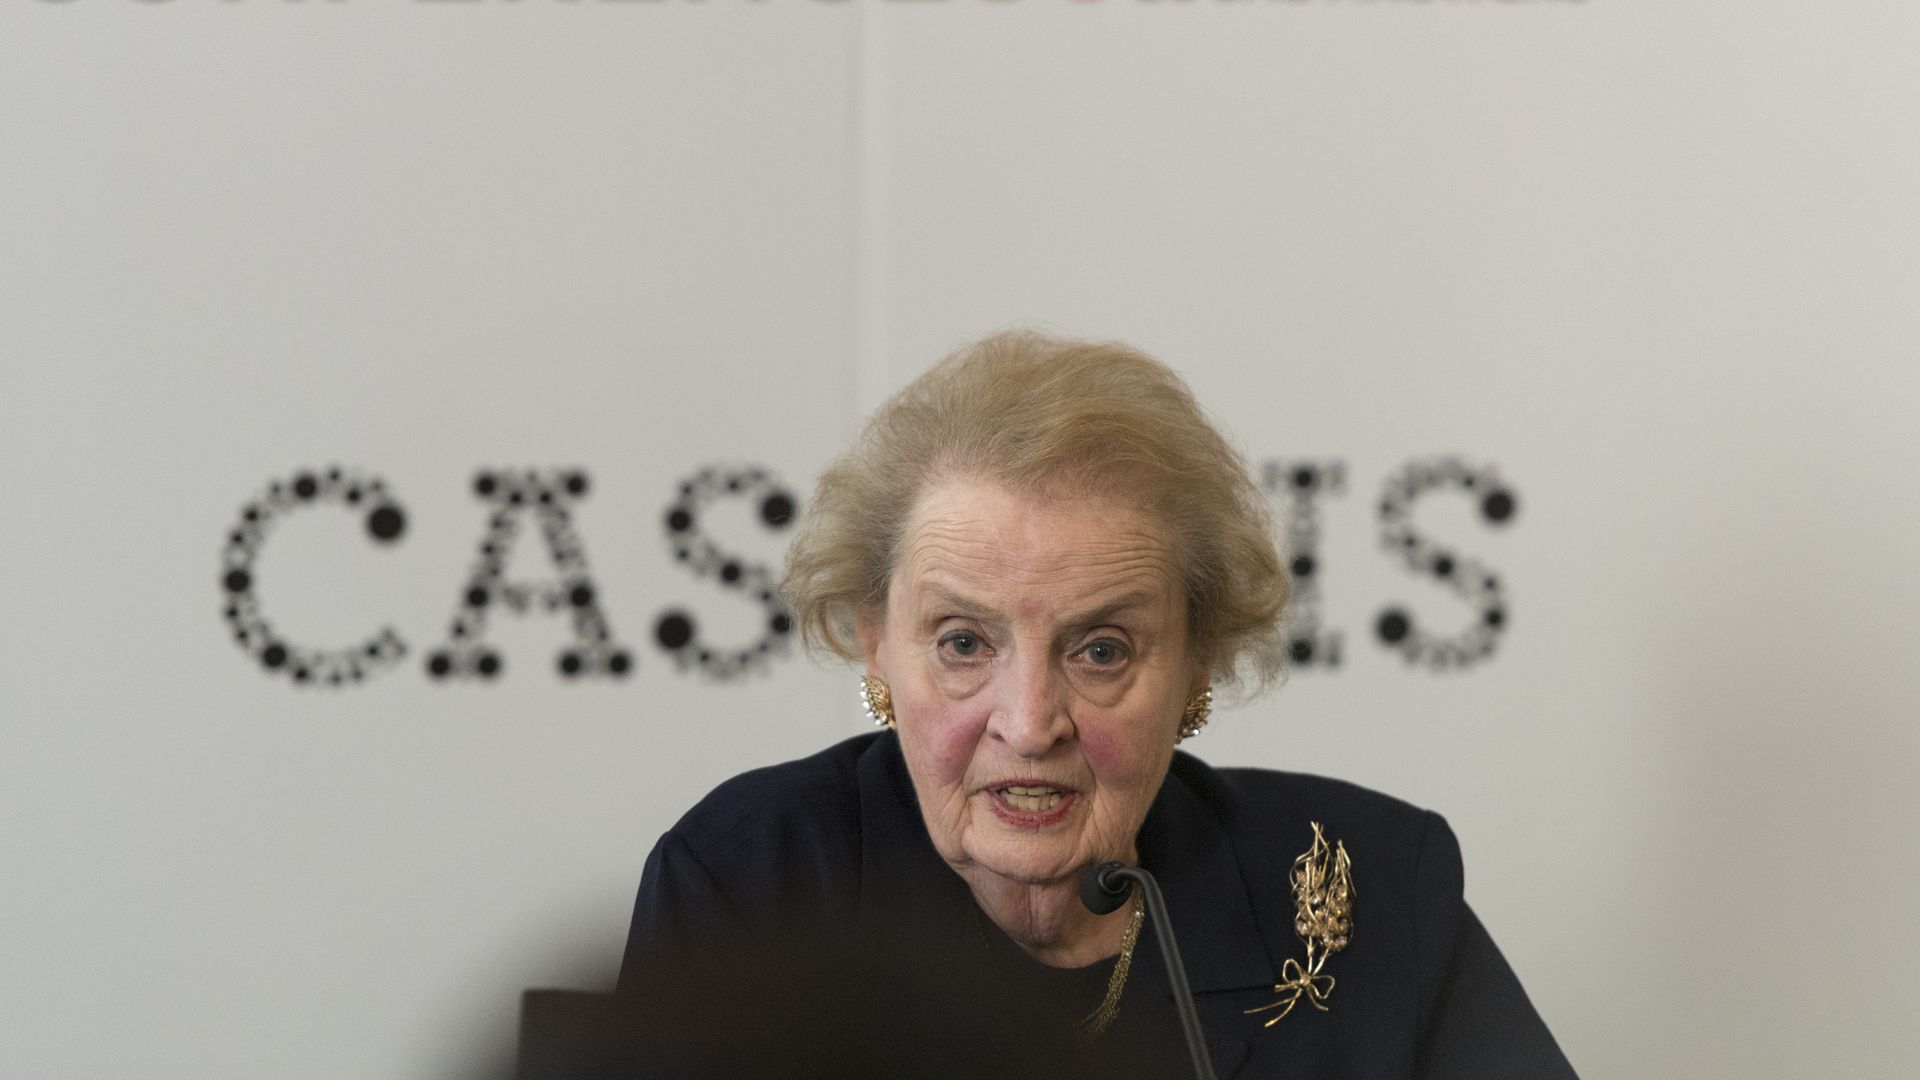 Madeleine Albright in black before a white background with black lettering.